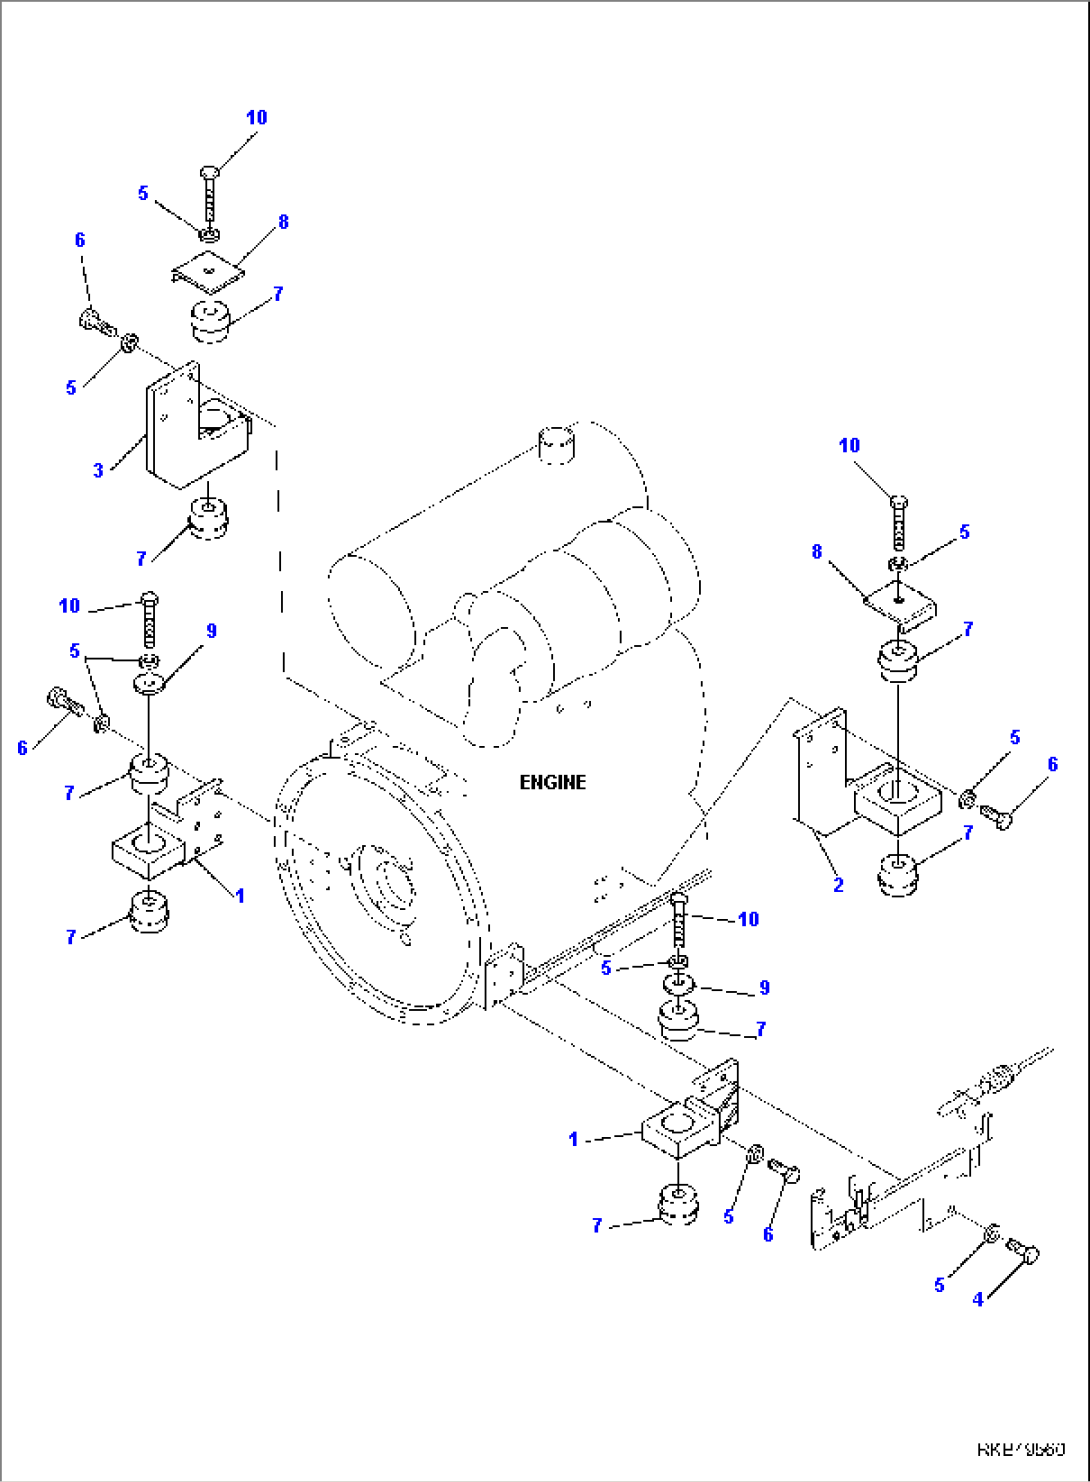 ENGINE MOUNTING PARTS